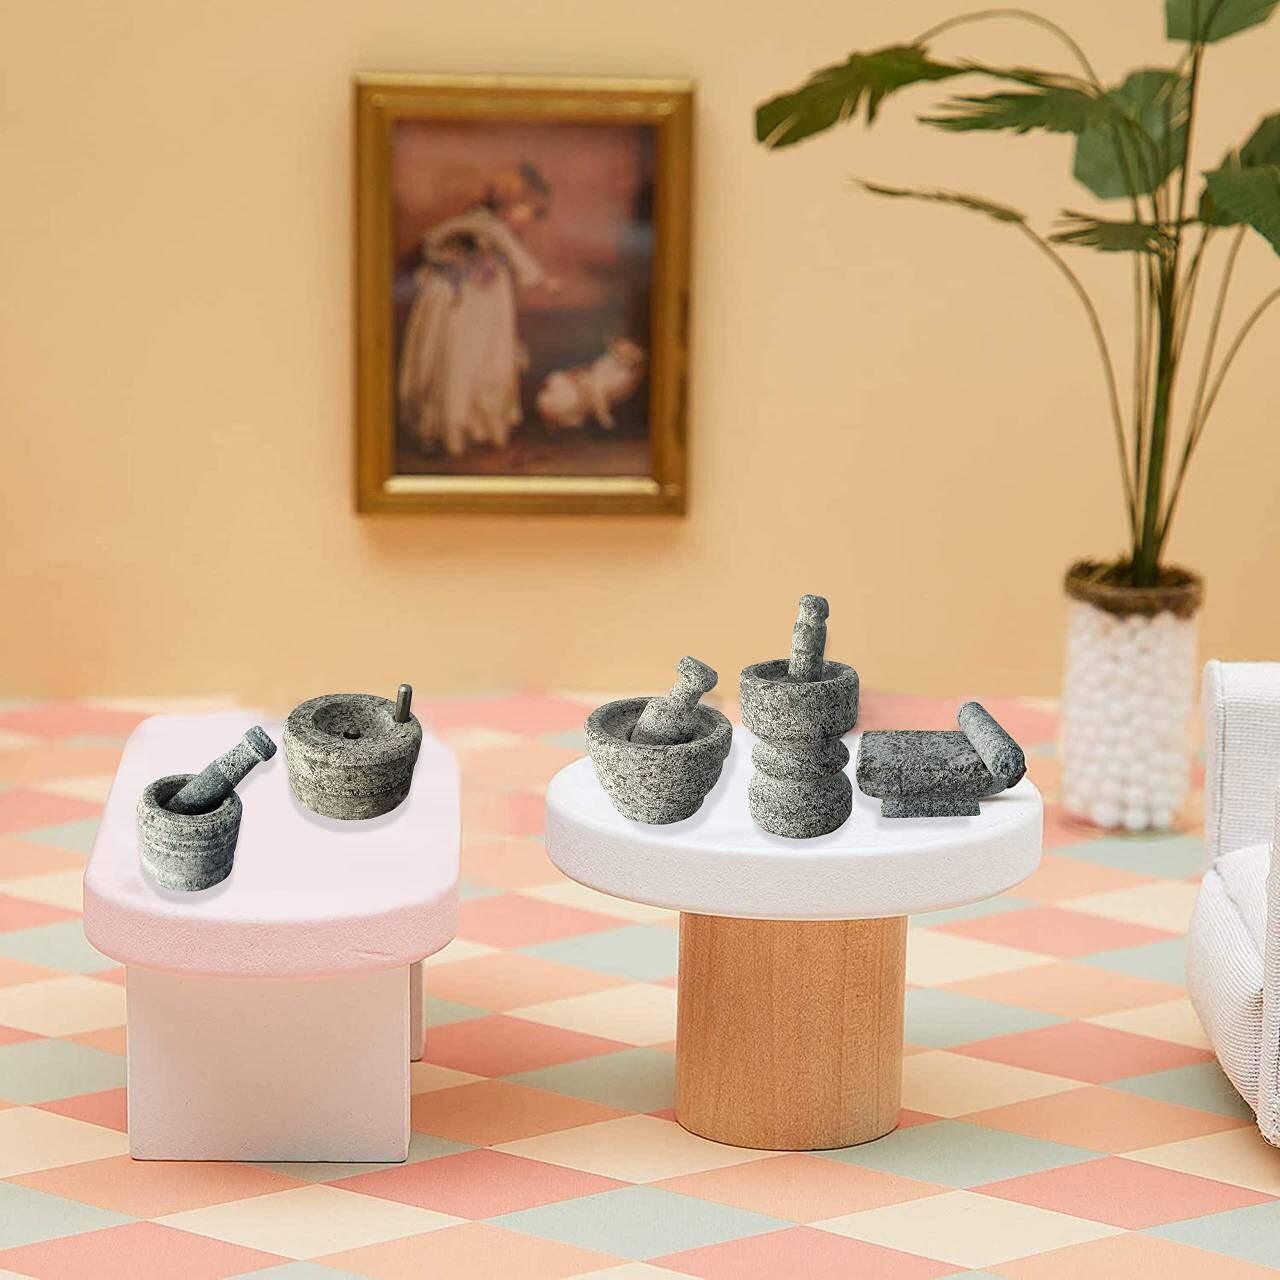 Real Cooking Miniature Set Miniature Mortar and Pestle Set Traditional Grinding Stone Kitchen Play Set Tiny Cooking Set Miniature Utensil